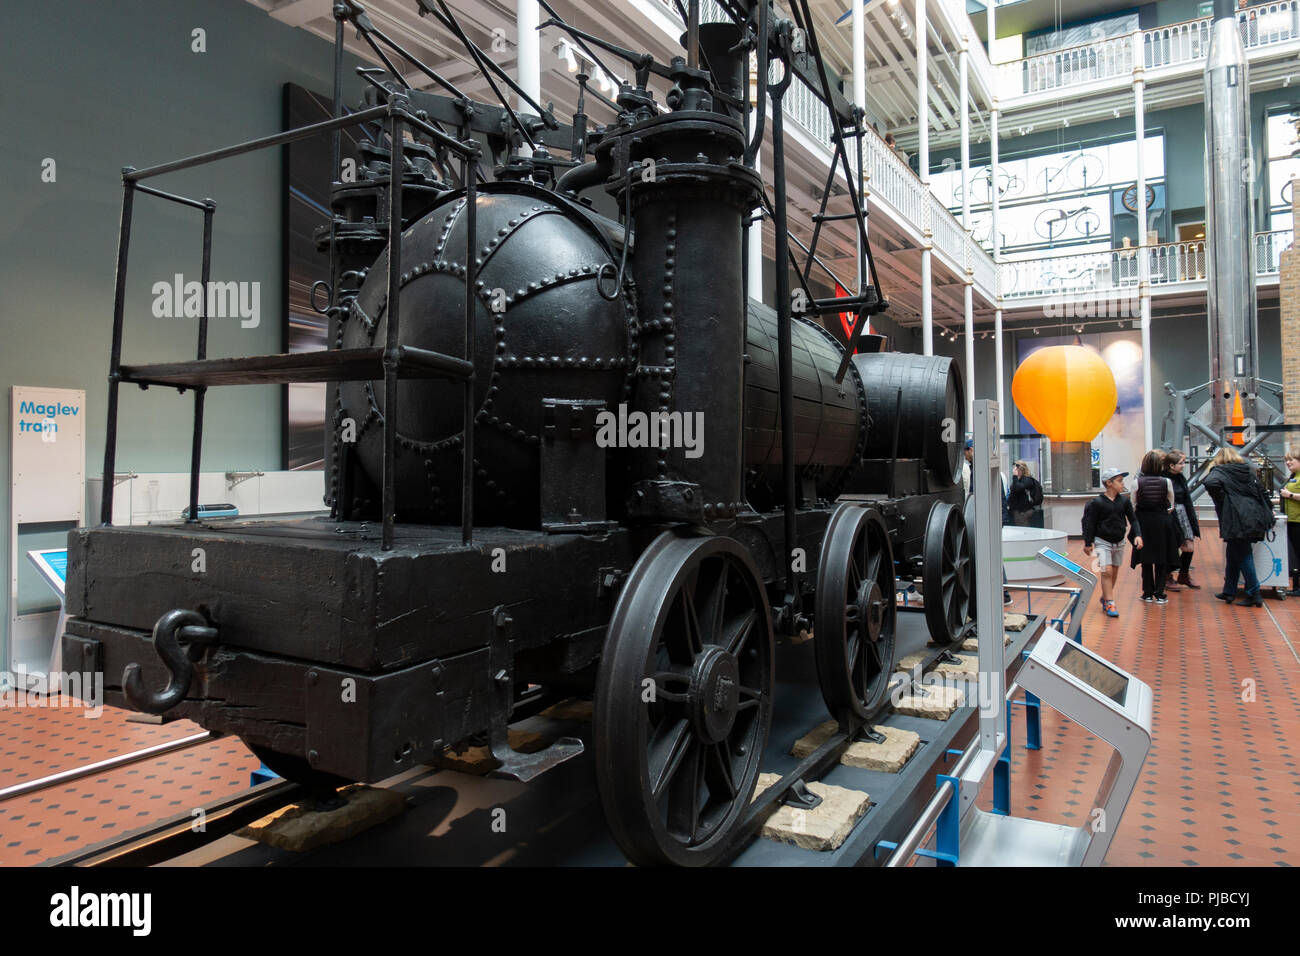 Wylam Dilly Locomotive , one of world's two oldest surviving steam locomotives built in 1813 at National Museum of Scotland in Edinburgh, Scotland, UK Stock Photo